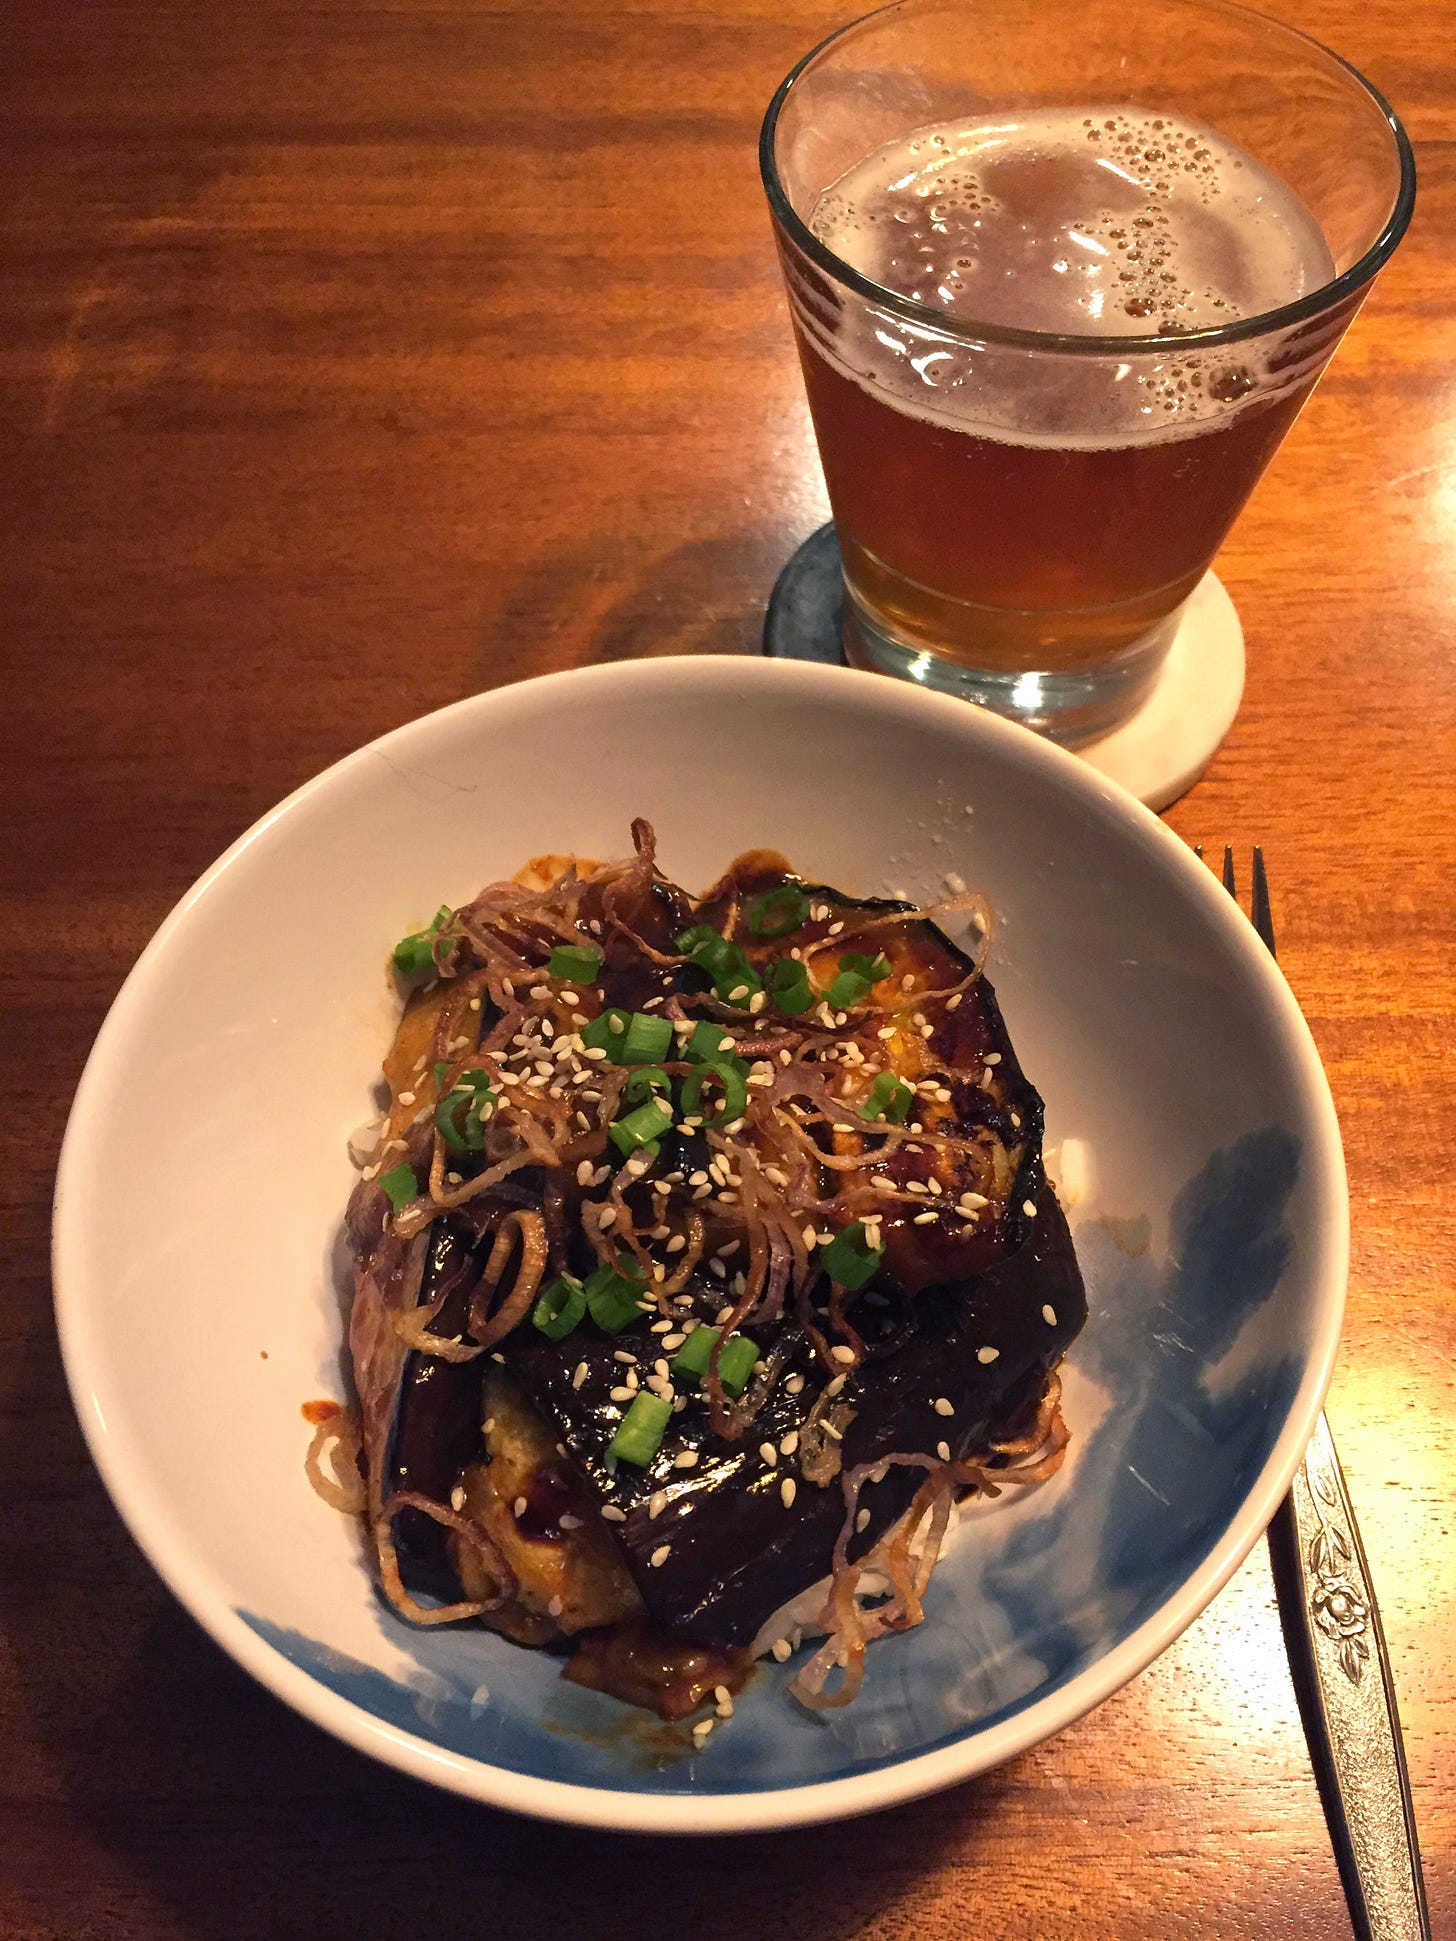 In a blue and white bowl, large slices of glazed eggplant sit on a bed of rice with fried shallots, chopped green onion, and sesame seeds scattered overtop. To the upper right of the bowl is a glass of pale ale.